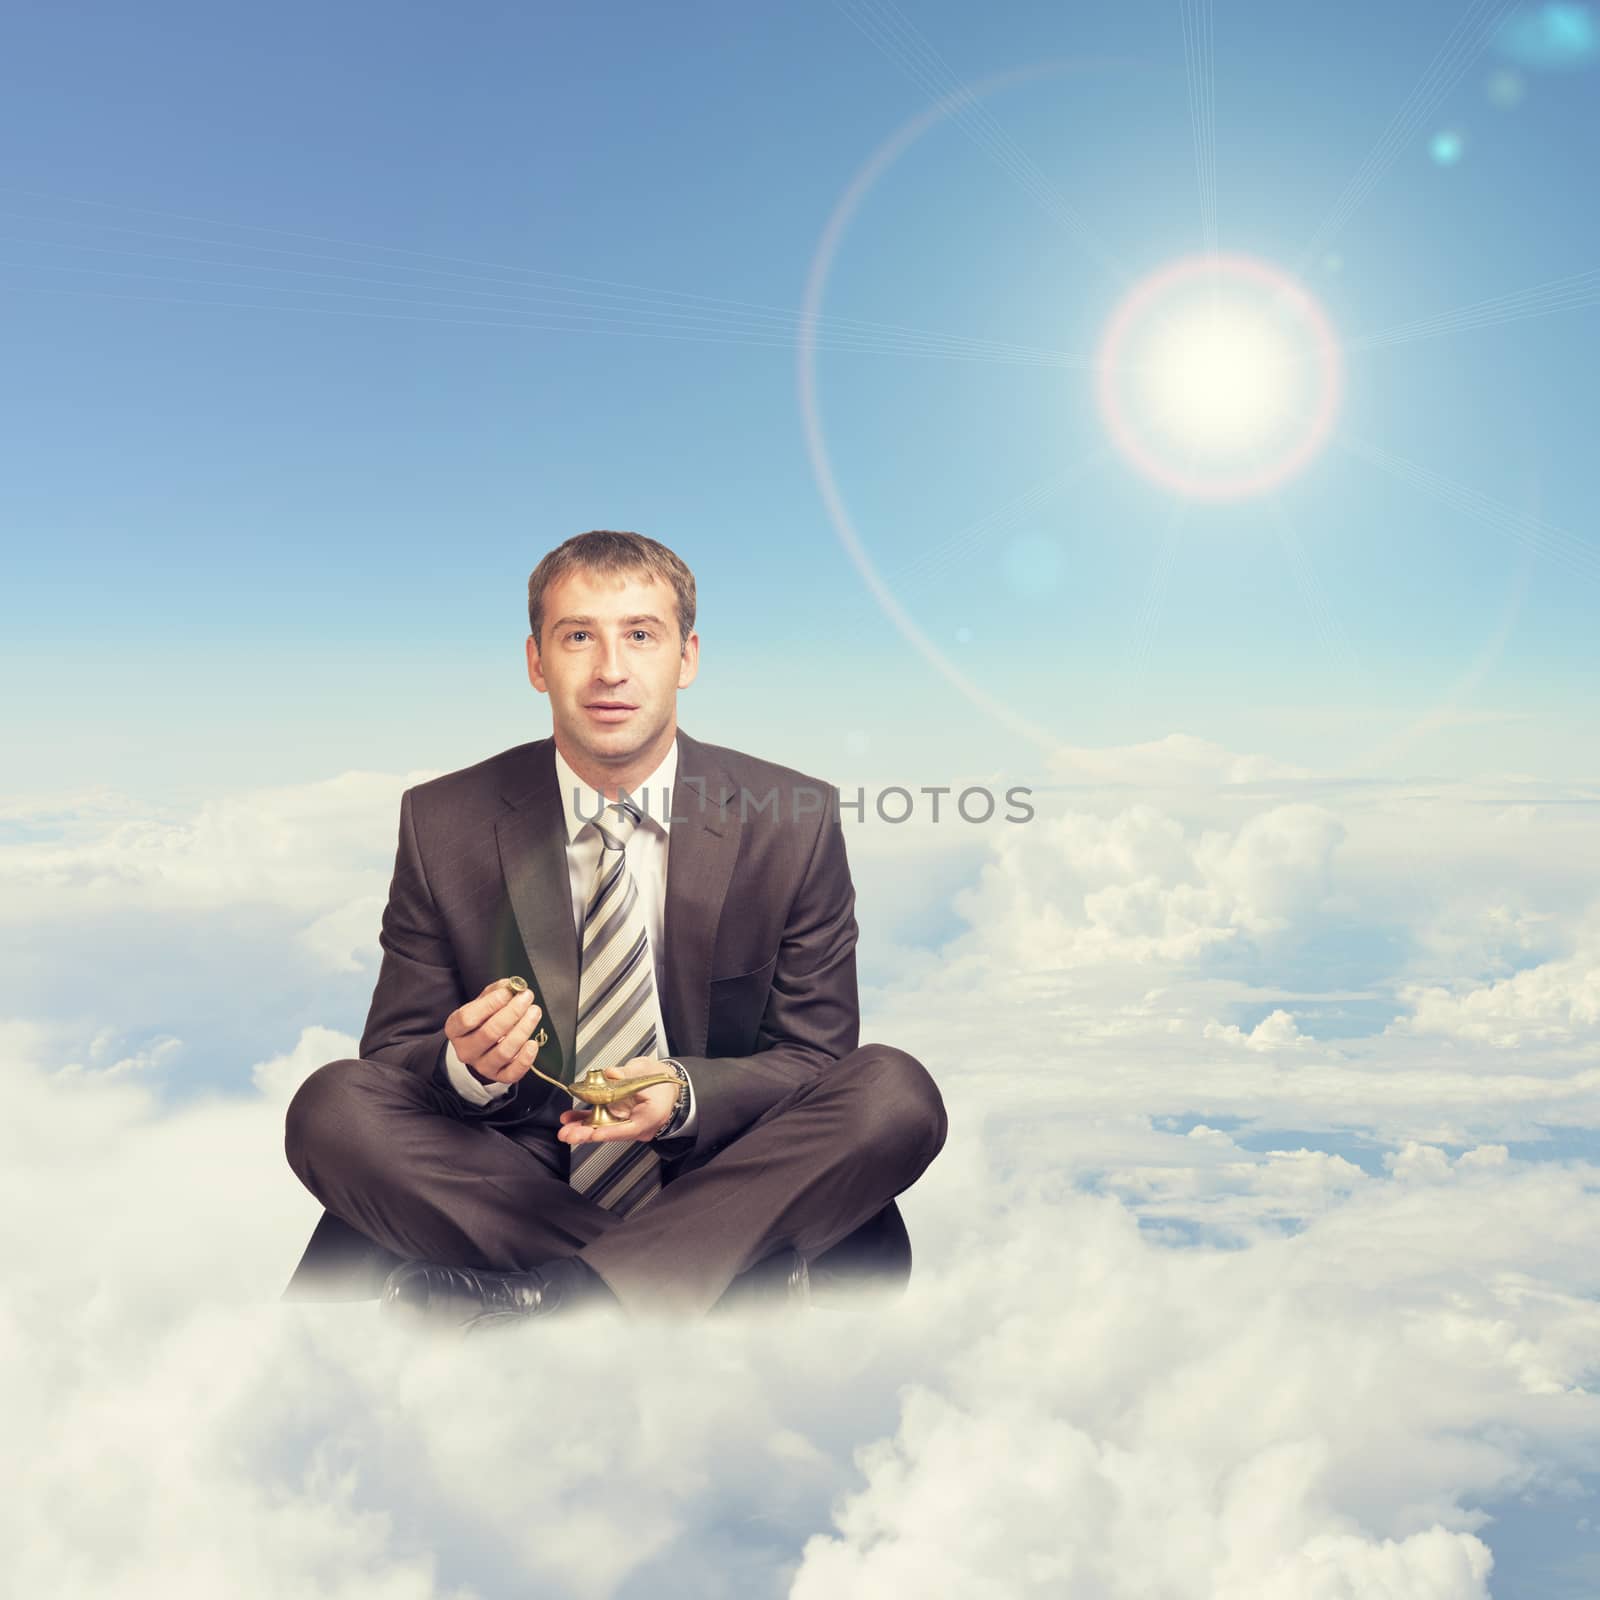 Businessman sitting in lotus position on cloud, holding oil lamp and looking at camera